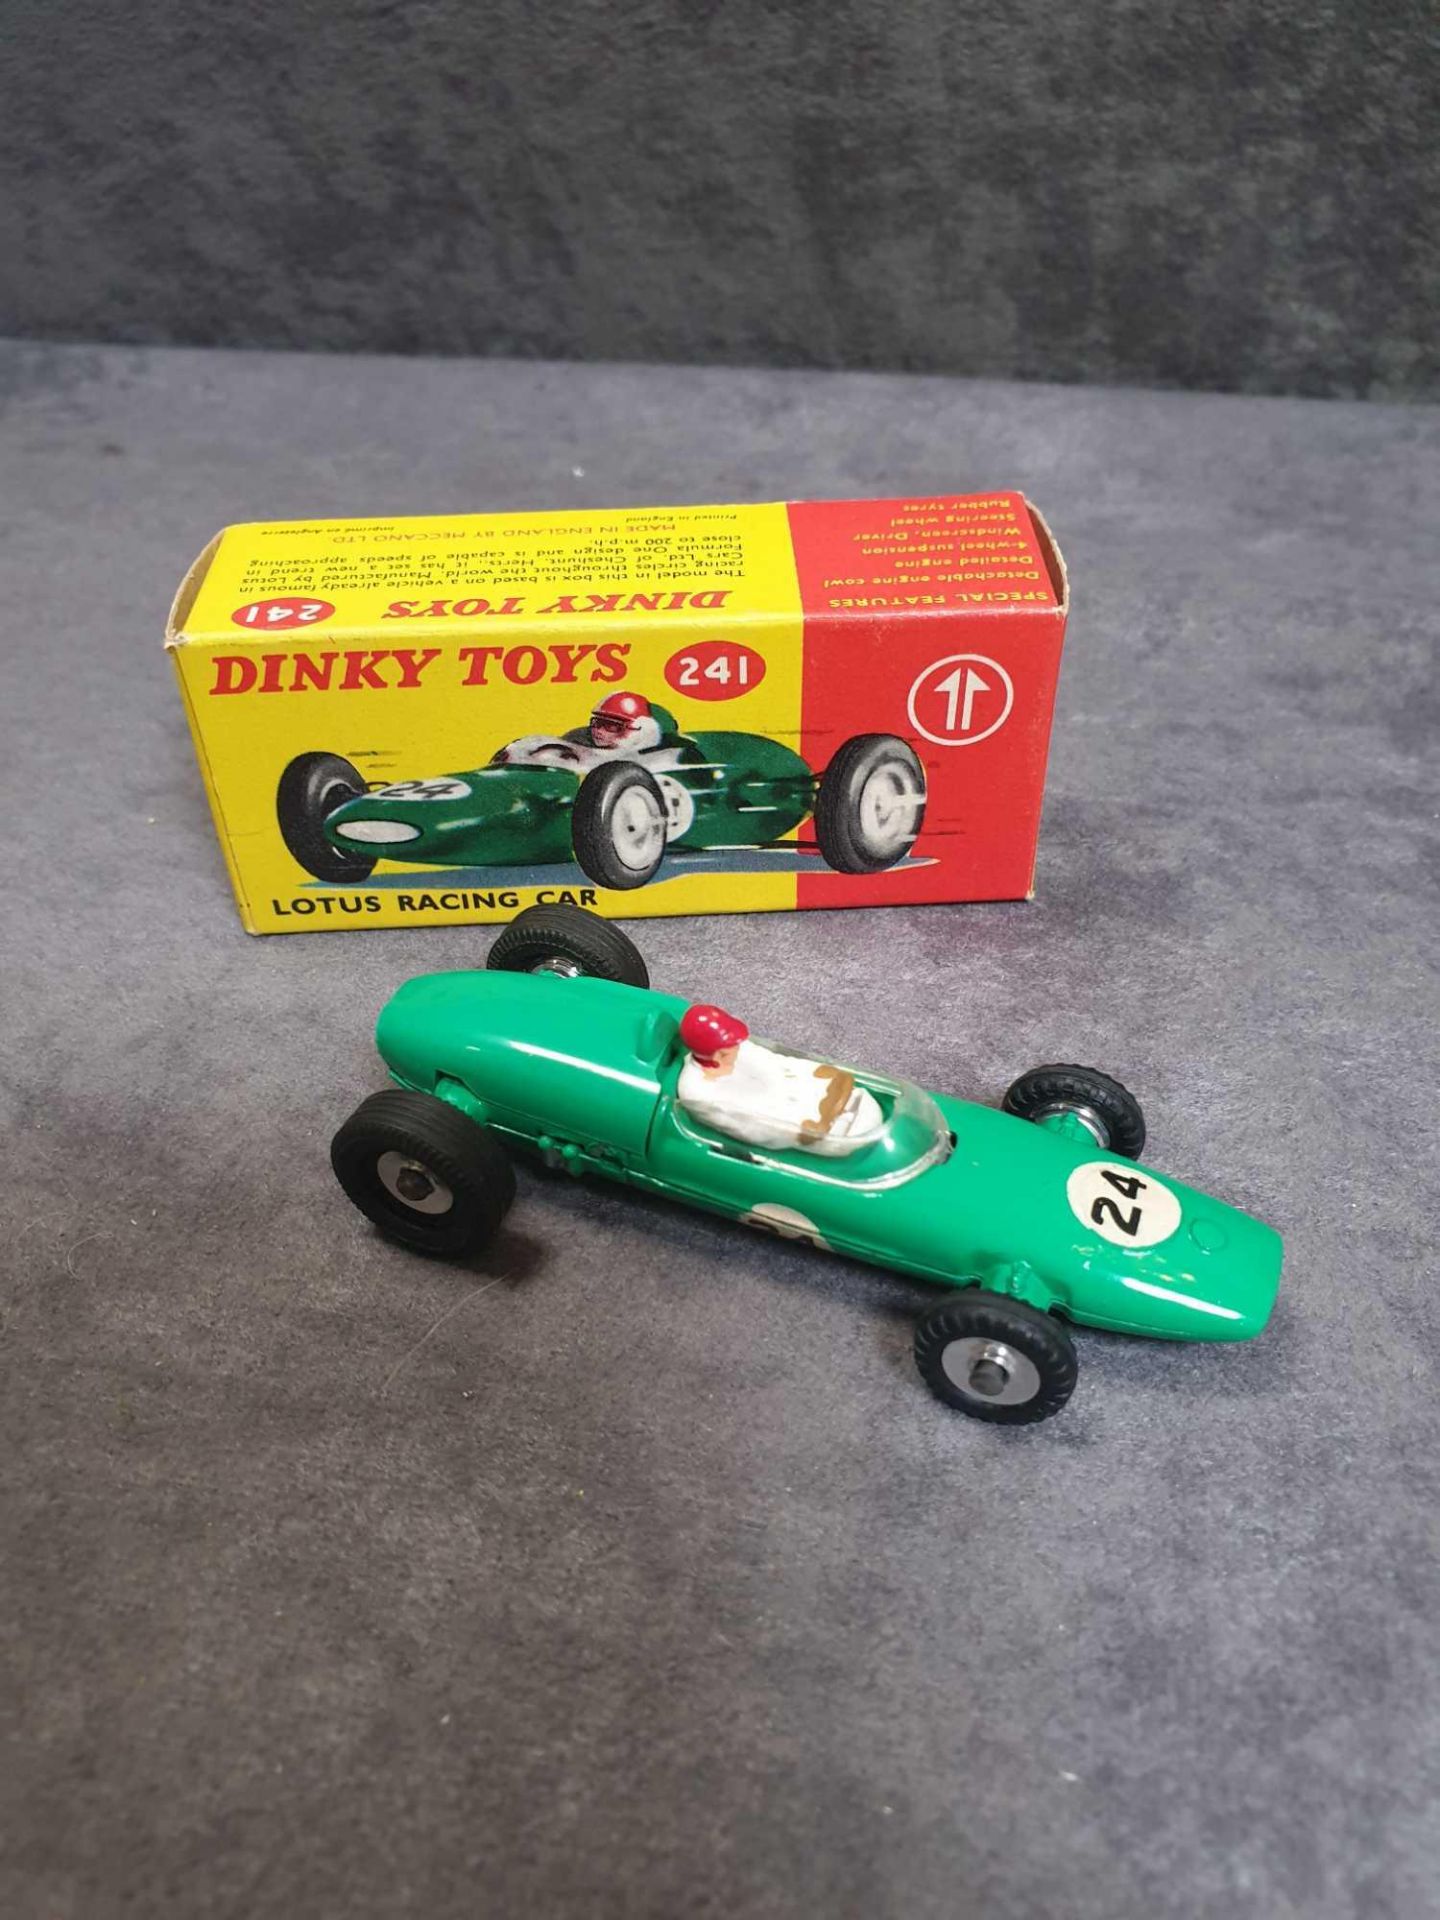 Mint Dinky Diecast #241 Lotus racing car green White driver with red helmet. RN #24 in a firm - Image 2 of 2